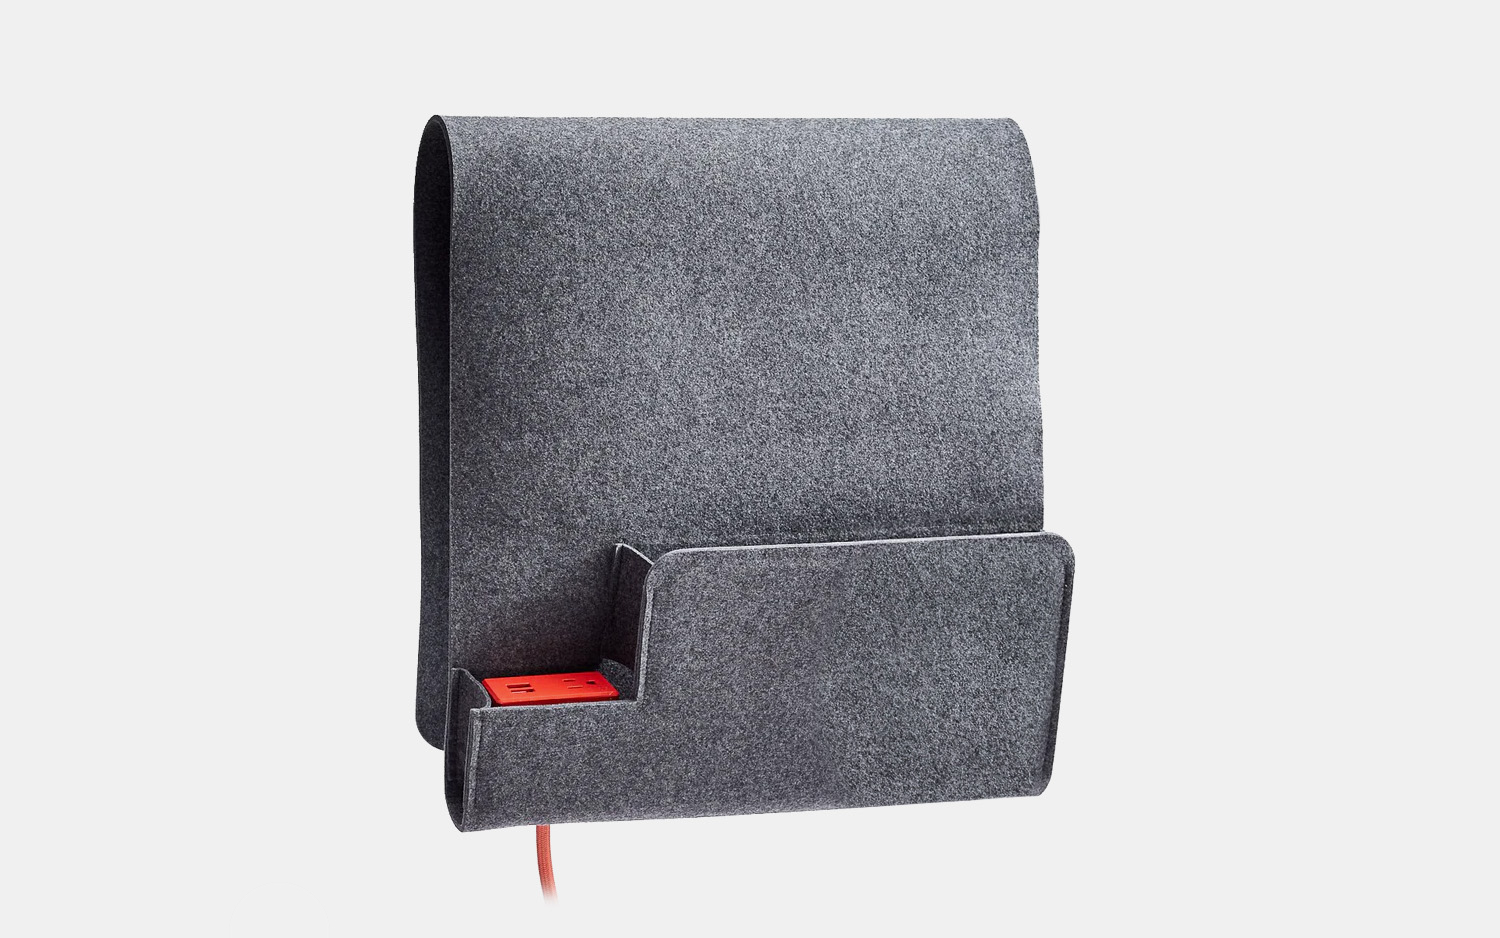 Sidekick Sofa Caddy With Outlet